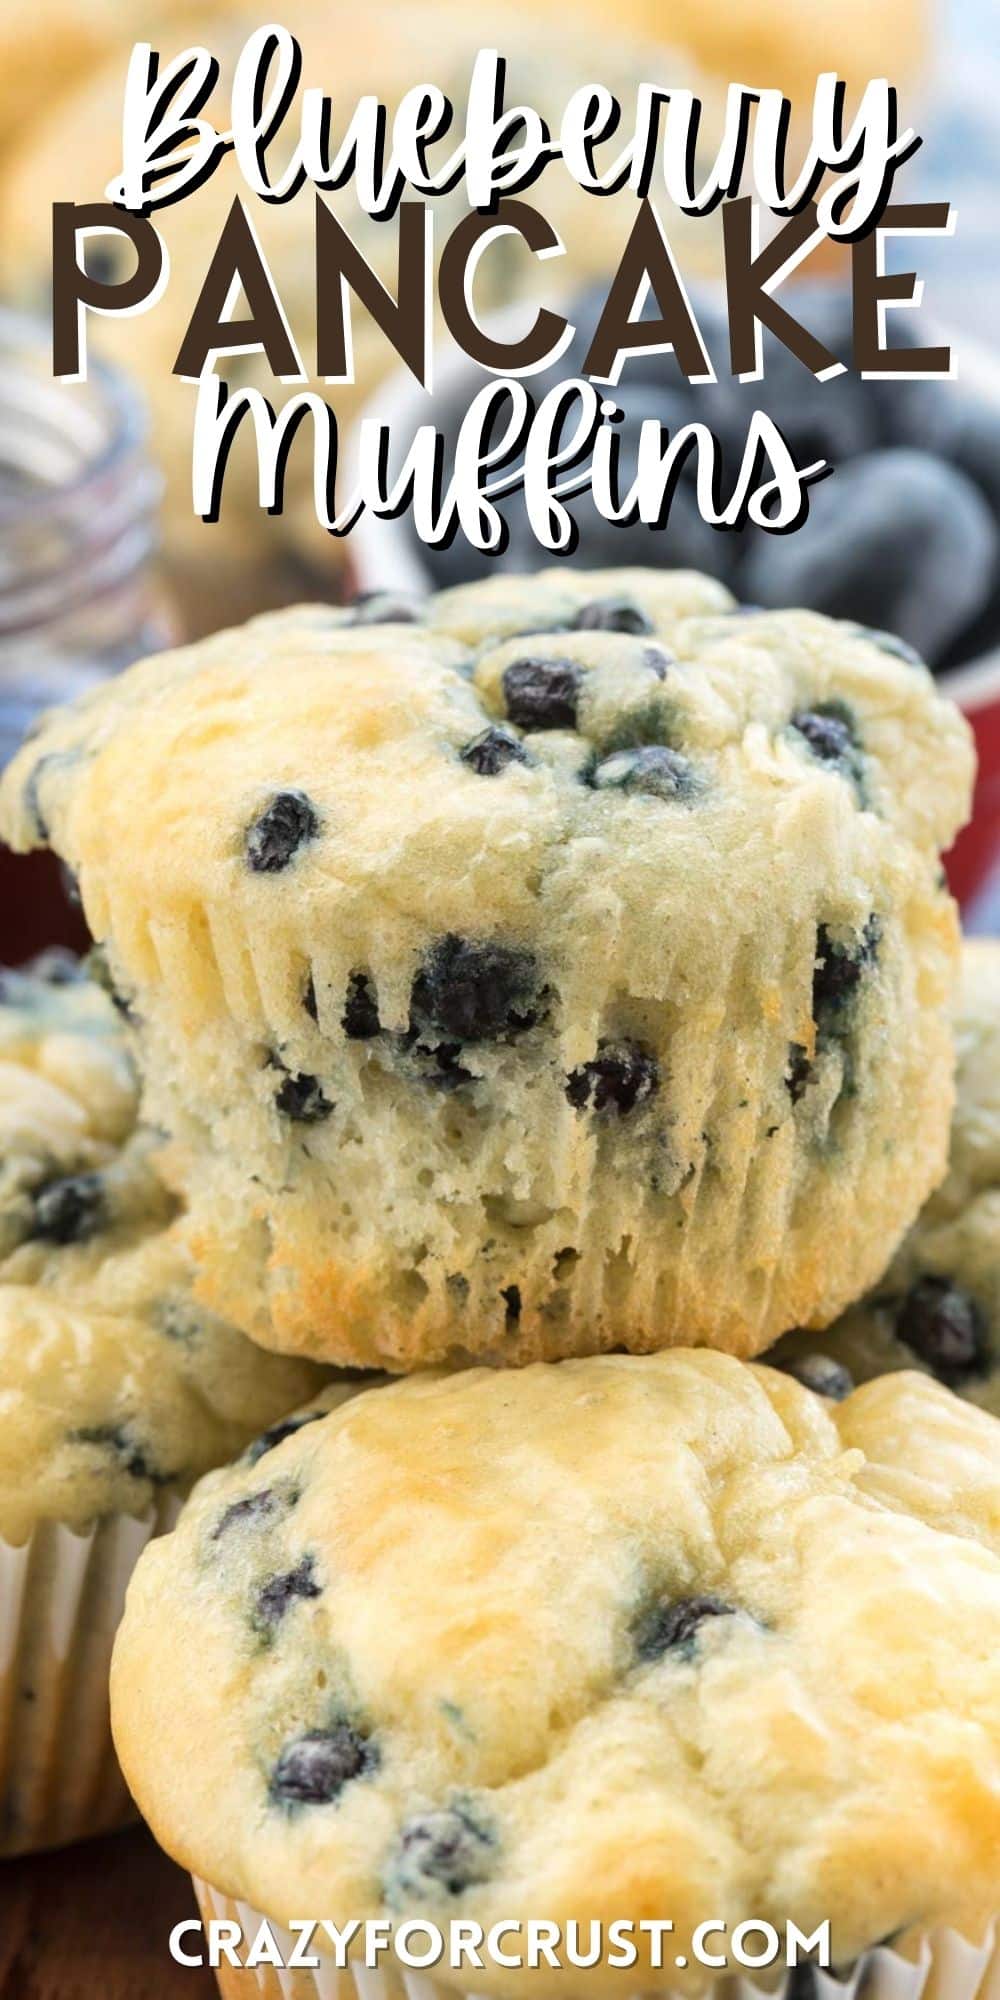 muffins stacked on other muffins with blueberries baked in with words on the image.